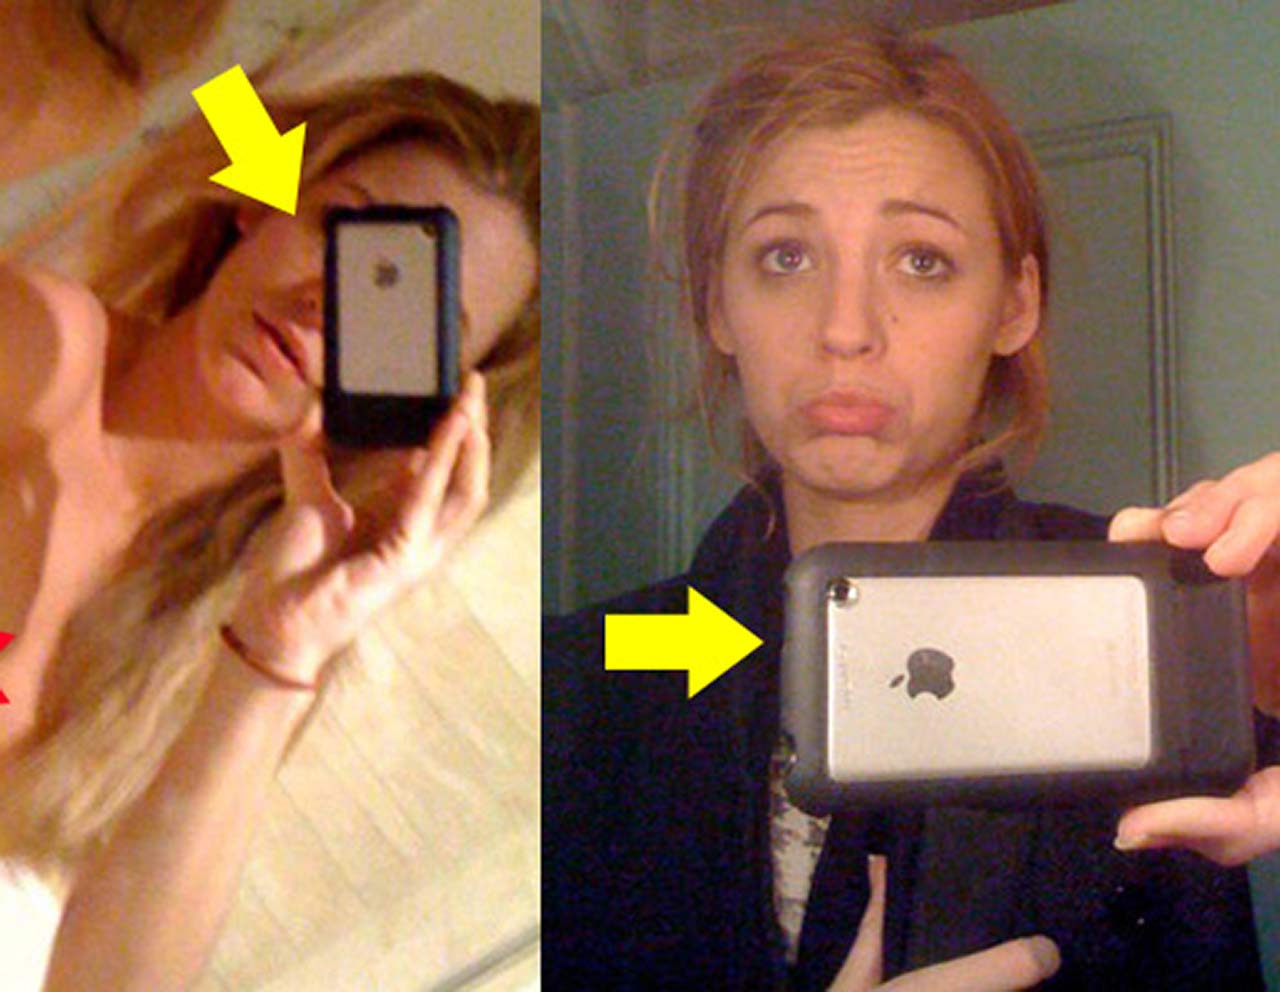 Blake Lively Nude Pics Leaked From Phone Unseen